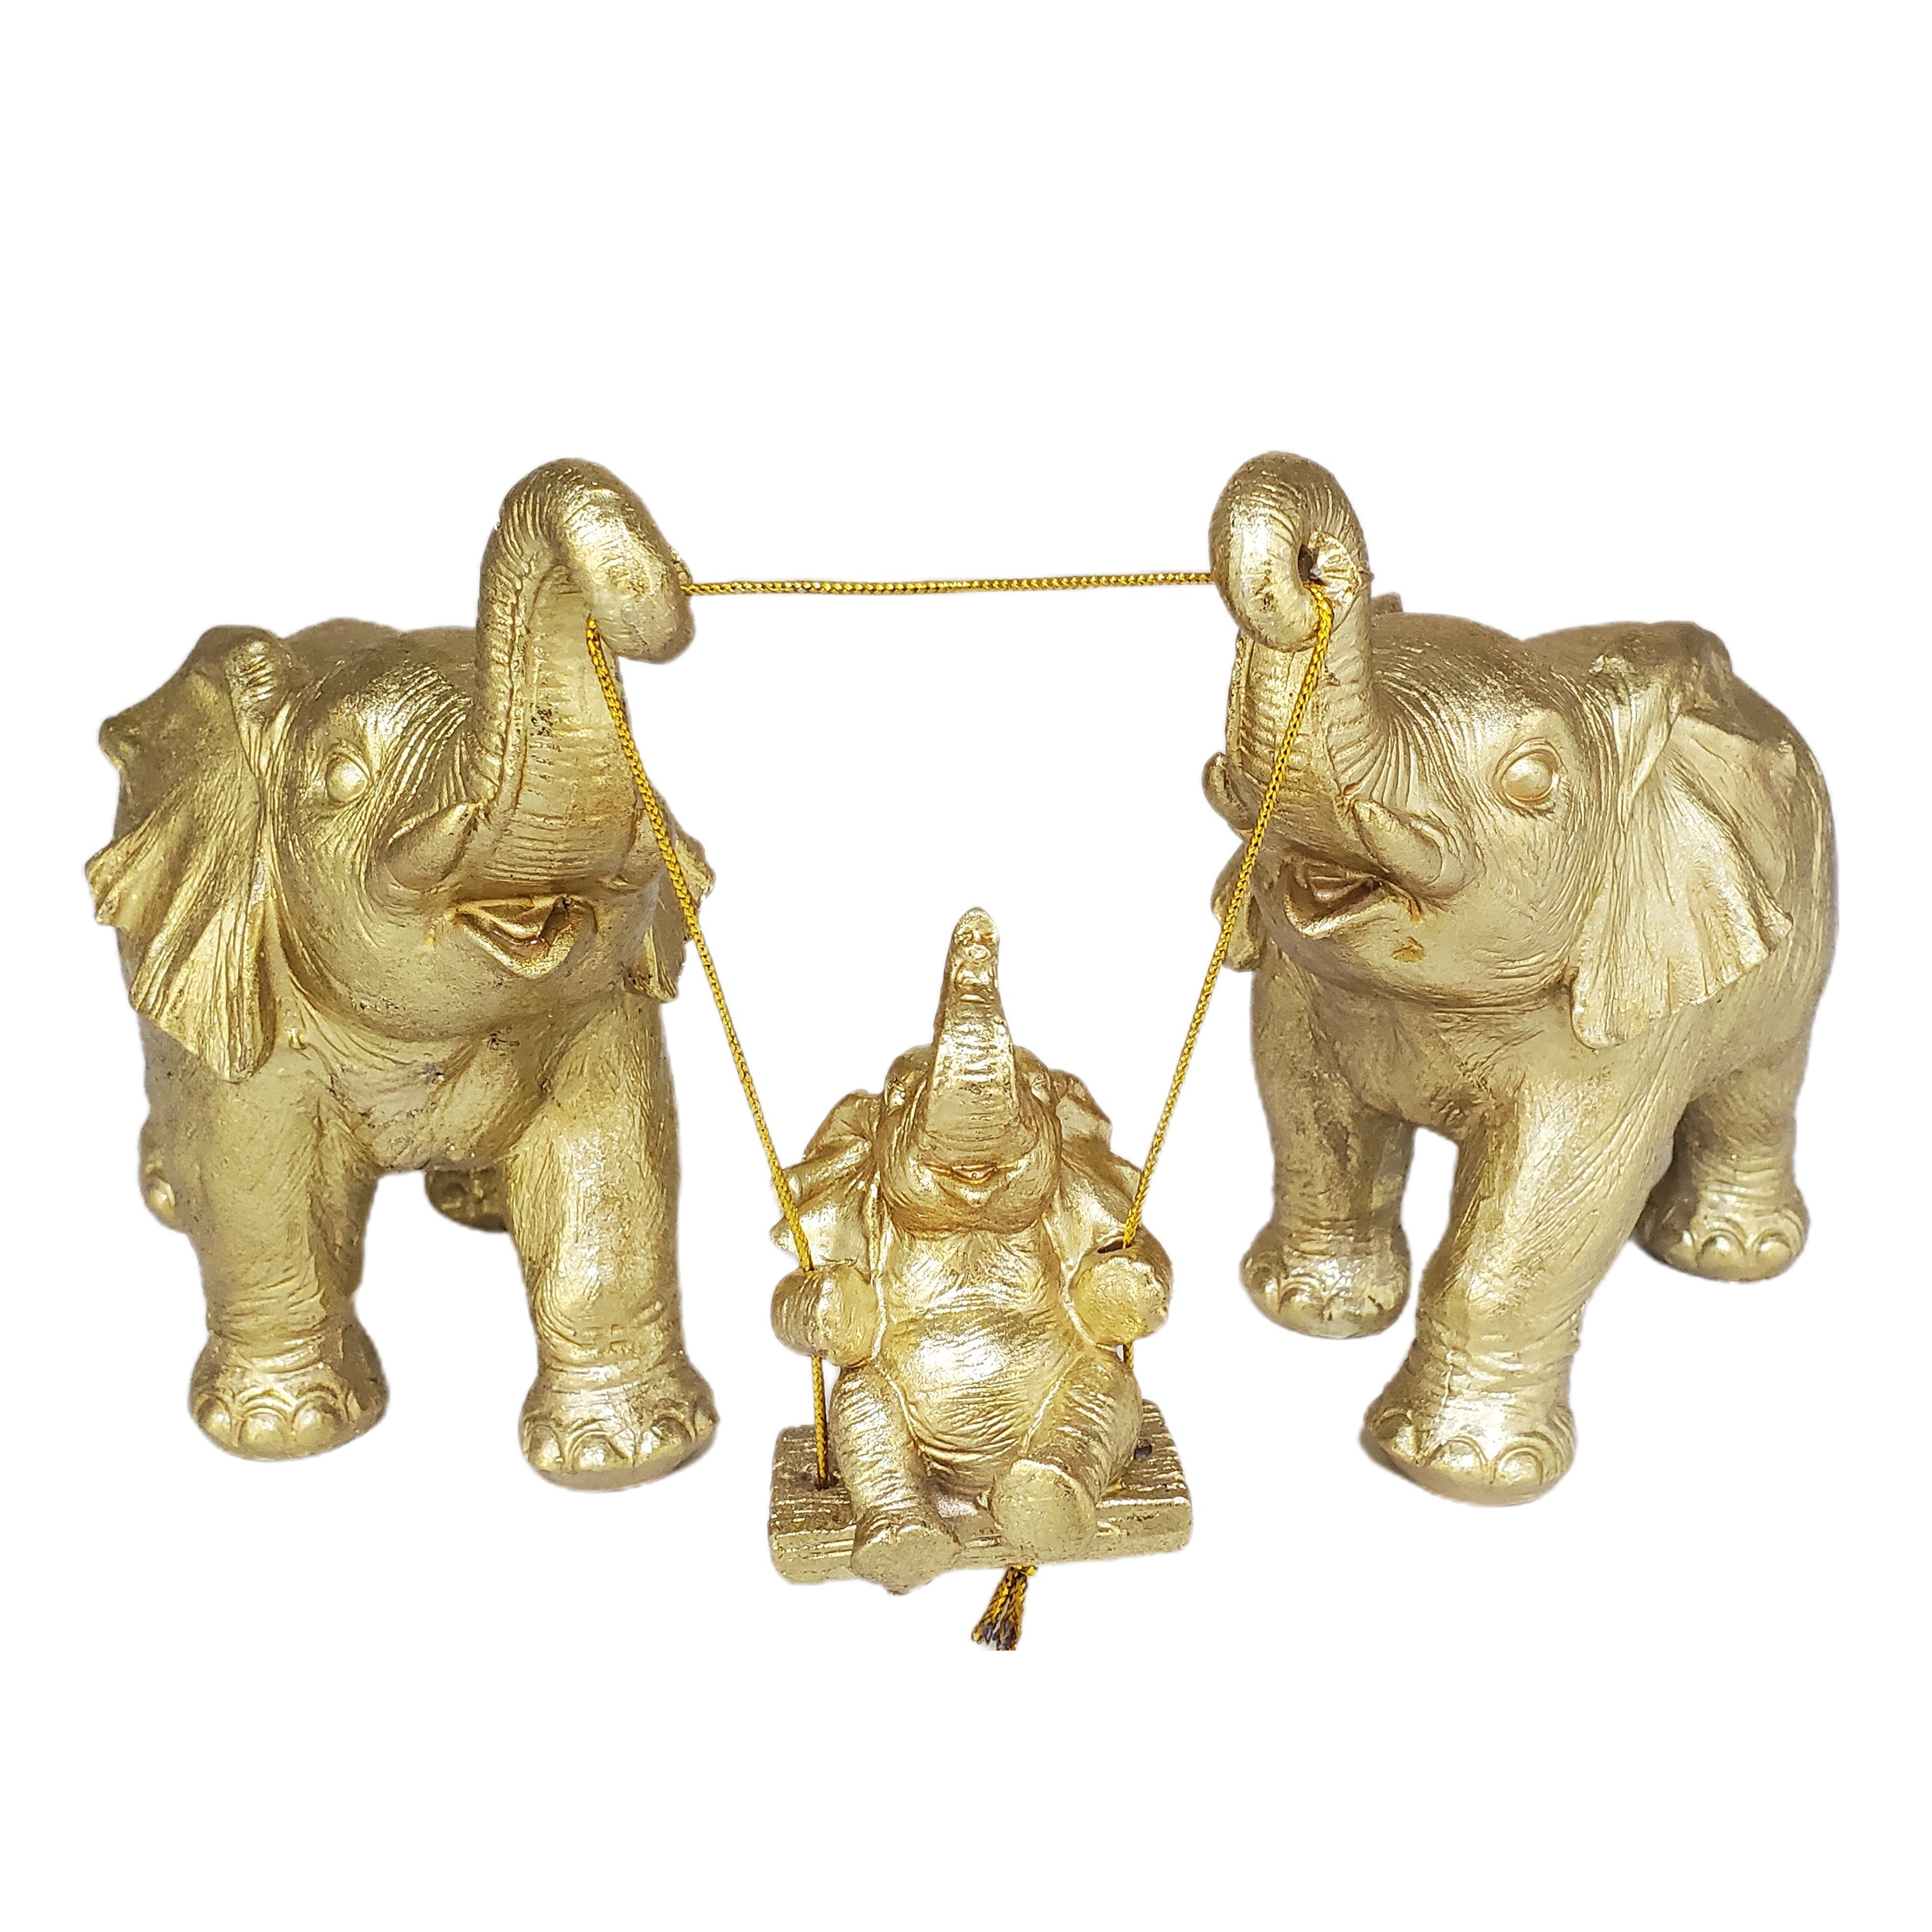 1pc Elephant Decor Statue, Elephant Gifts For Women, Modern Home Decor  Accents For Living Room, Dining Room Table Office Desktop,room Decor,home  Decor